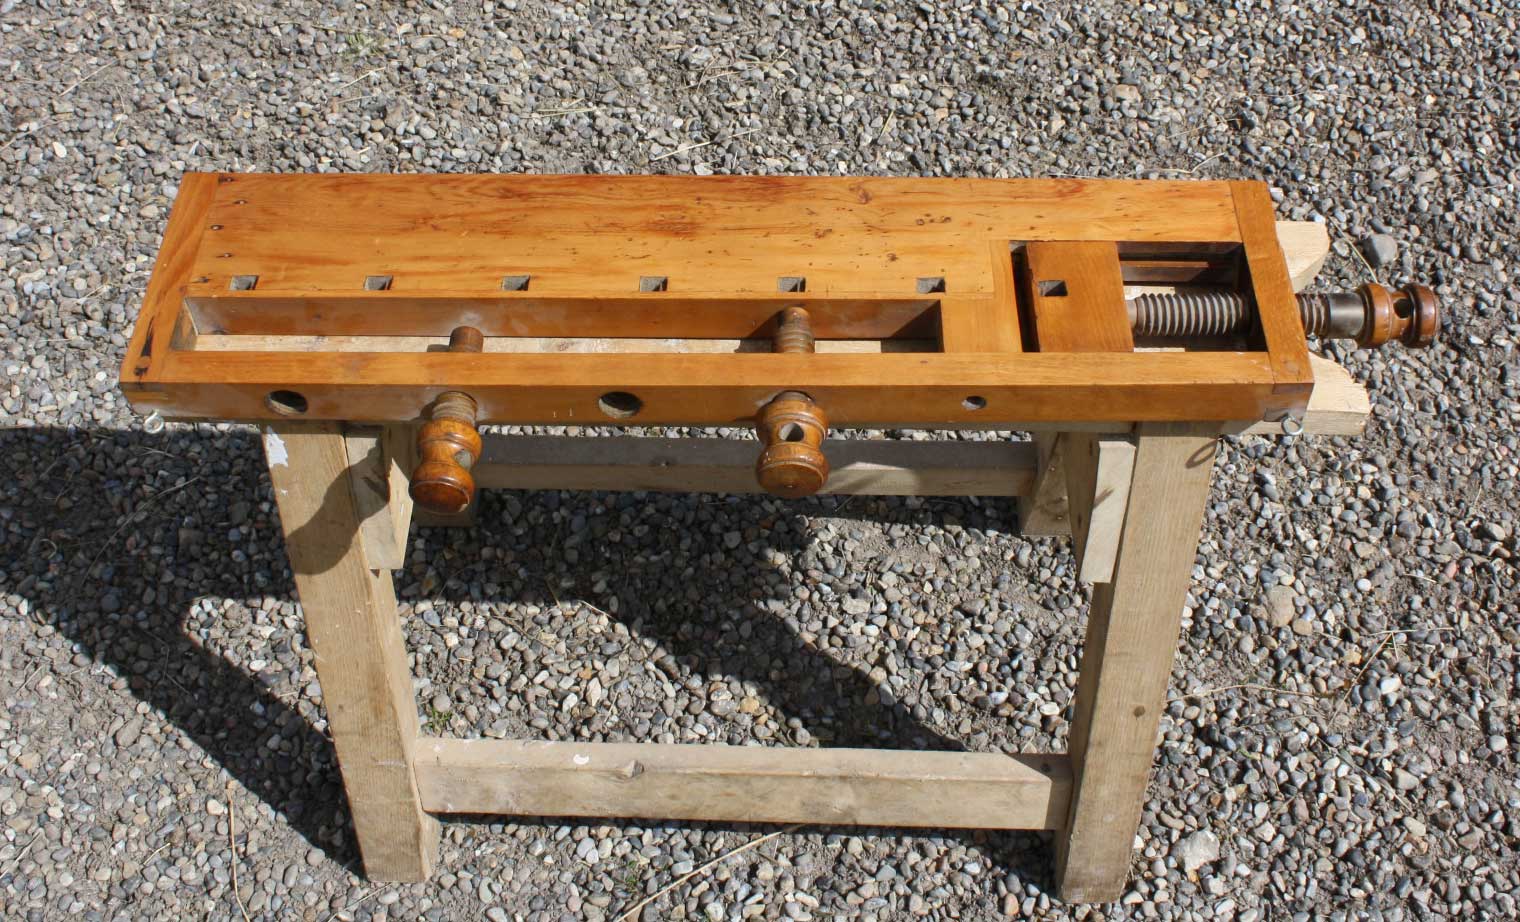 http://www.popularwoodworking.com/wp-content/uploads/portable_bench_overall_IMG_2046.jpg